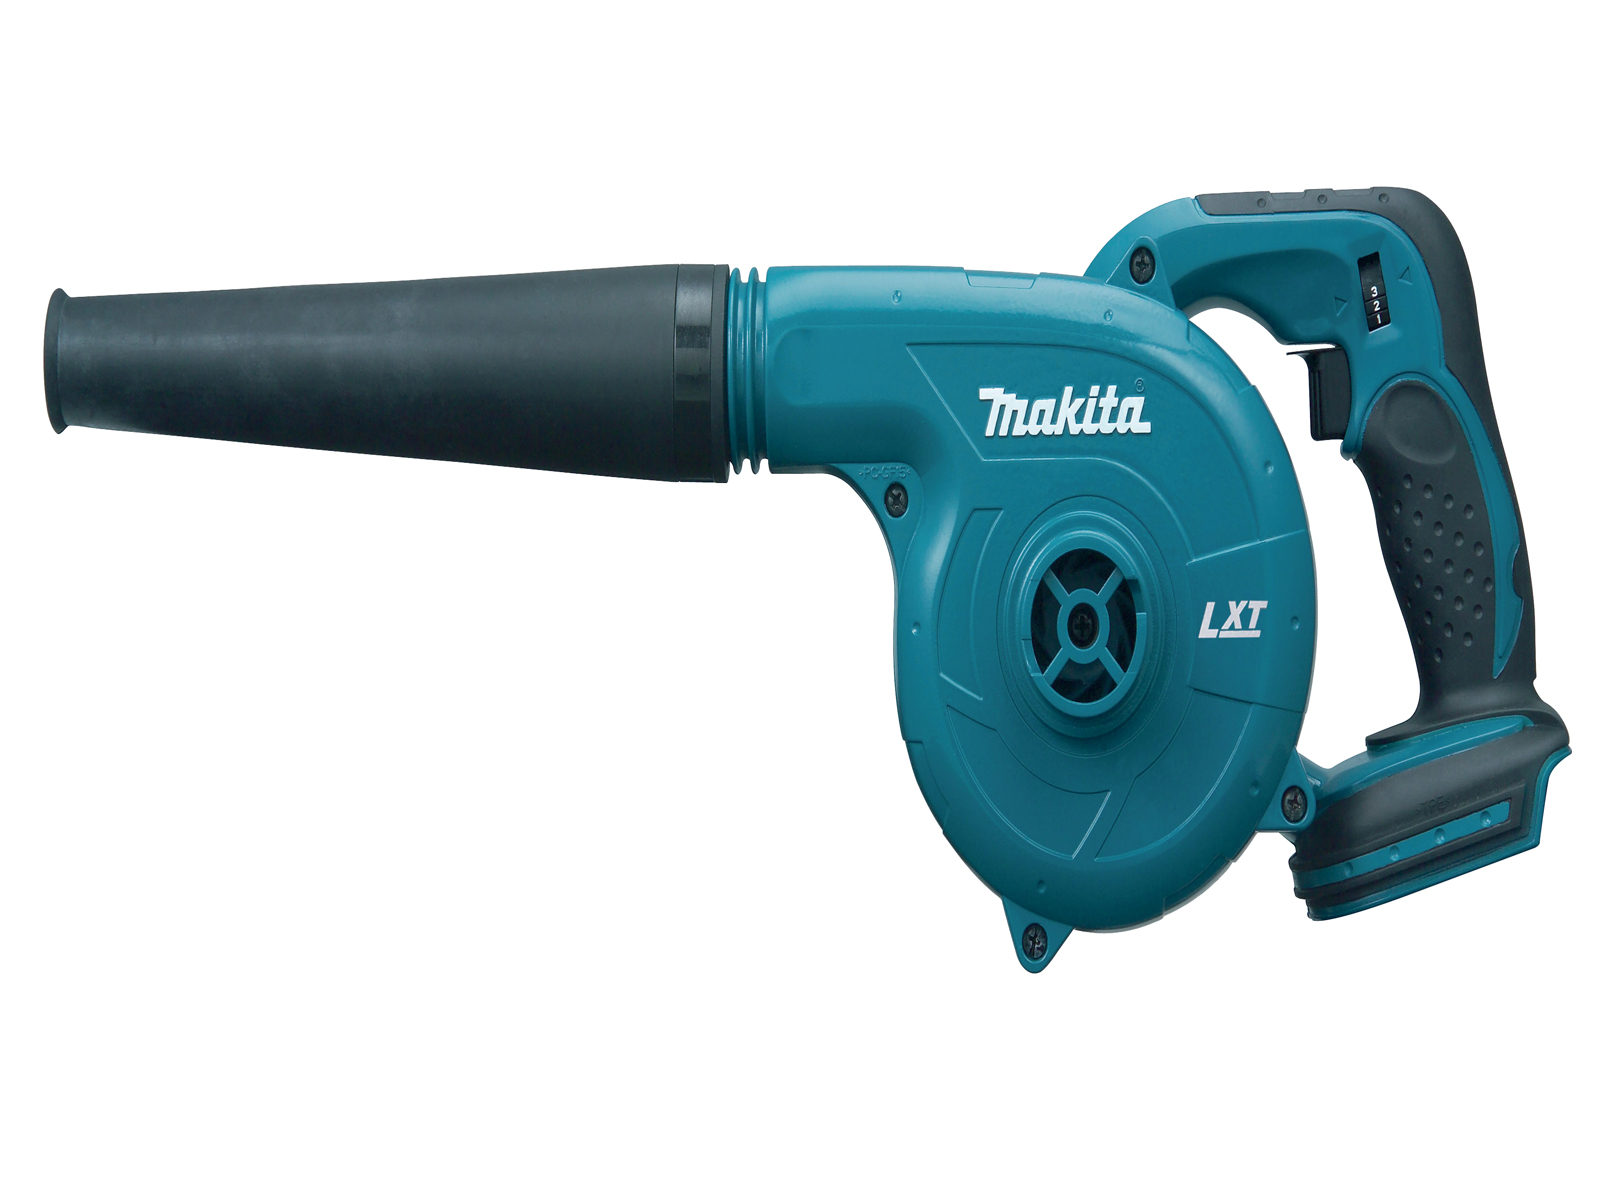 Makita 18V Brushed LXT Cordless 3 Speed Blower - DUB185 - Body Only